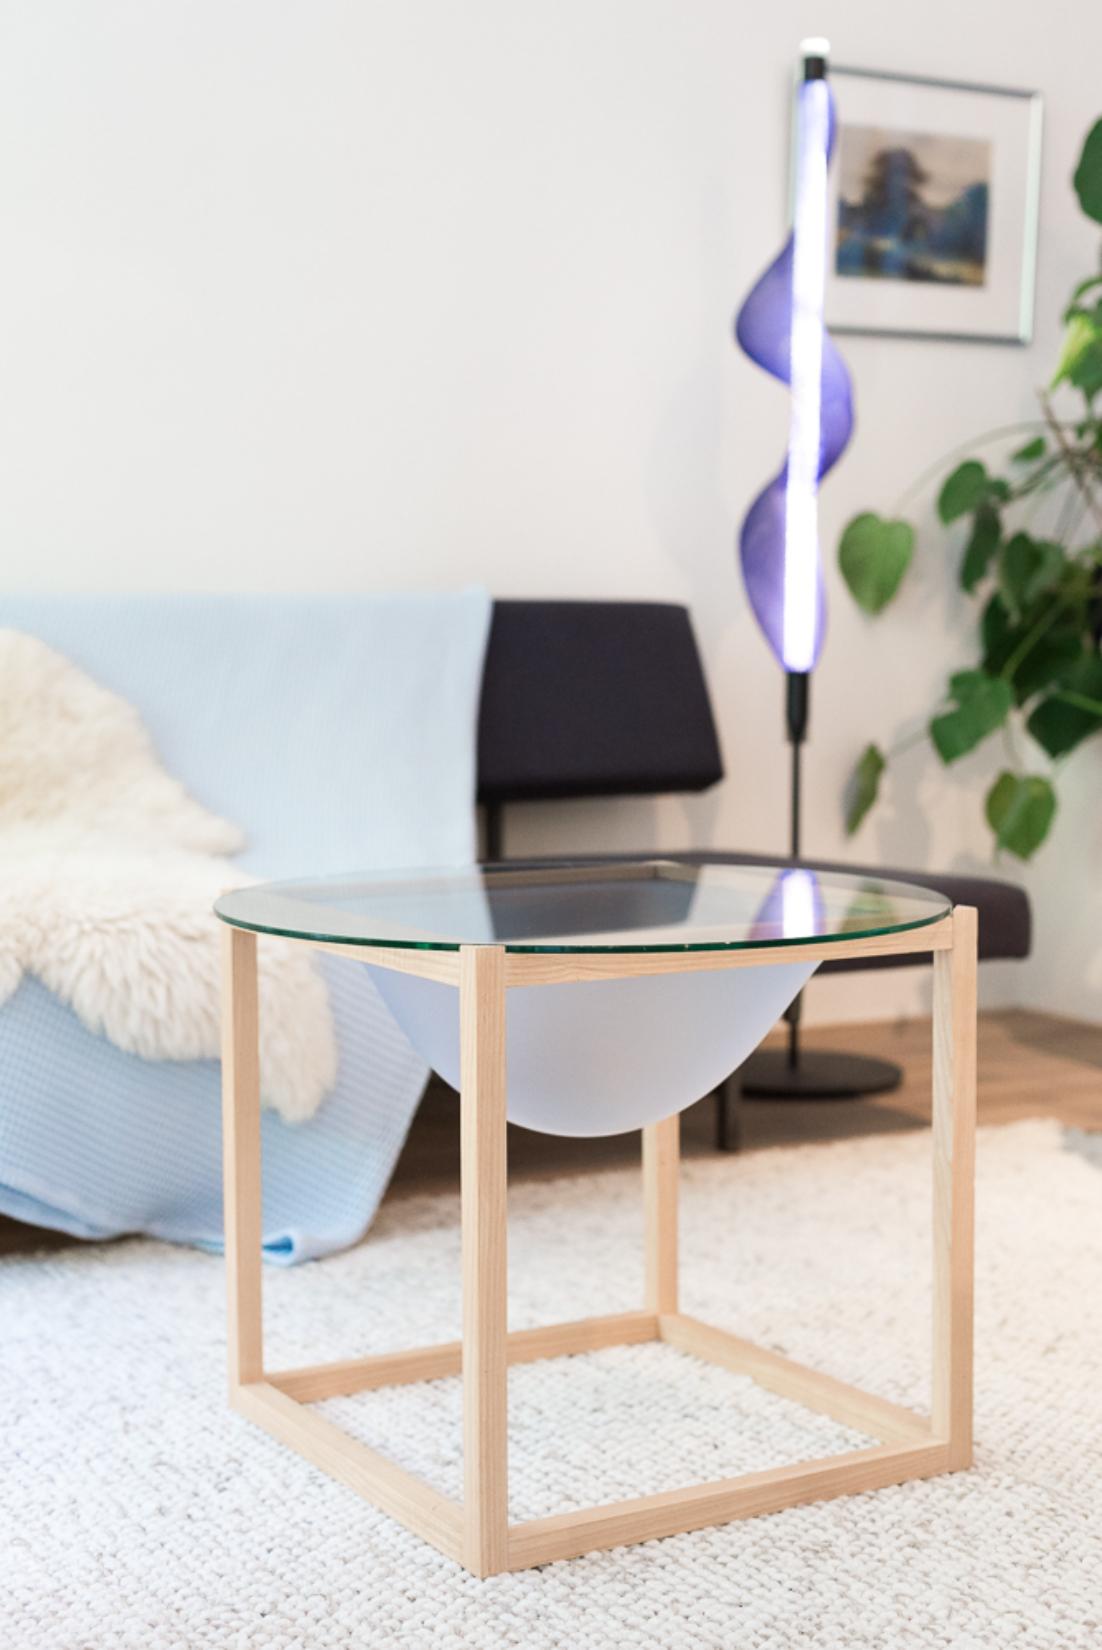 Small Bubble Coffee Table by Studio Thier & van Daalen
Dimensions: W 45 x D 45 x H 45 cm
Materials: Ash, Acrylic Glass, Glass
Also Available: Other colour options available,

With an unique look and effect of depth, this coffee table will bring